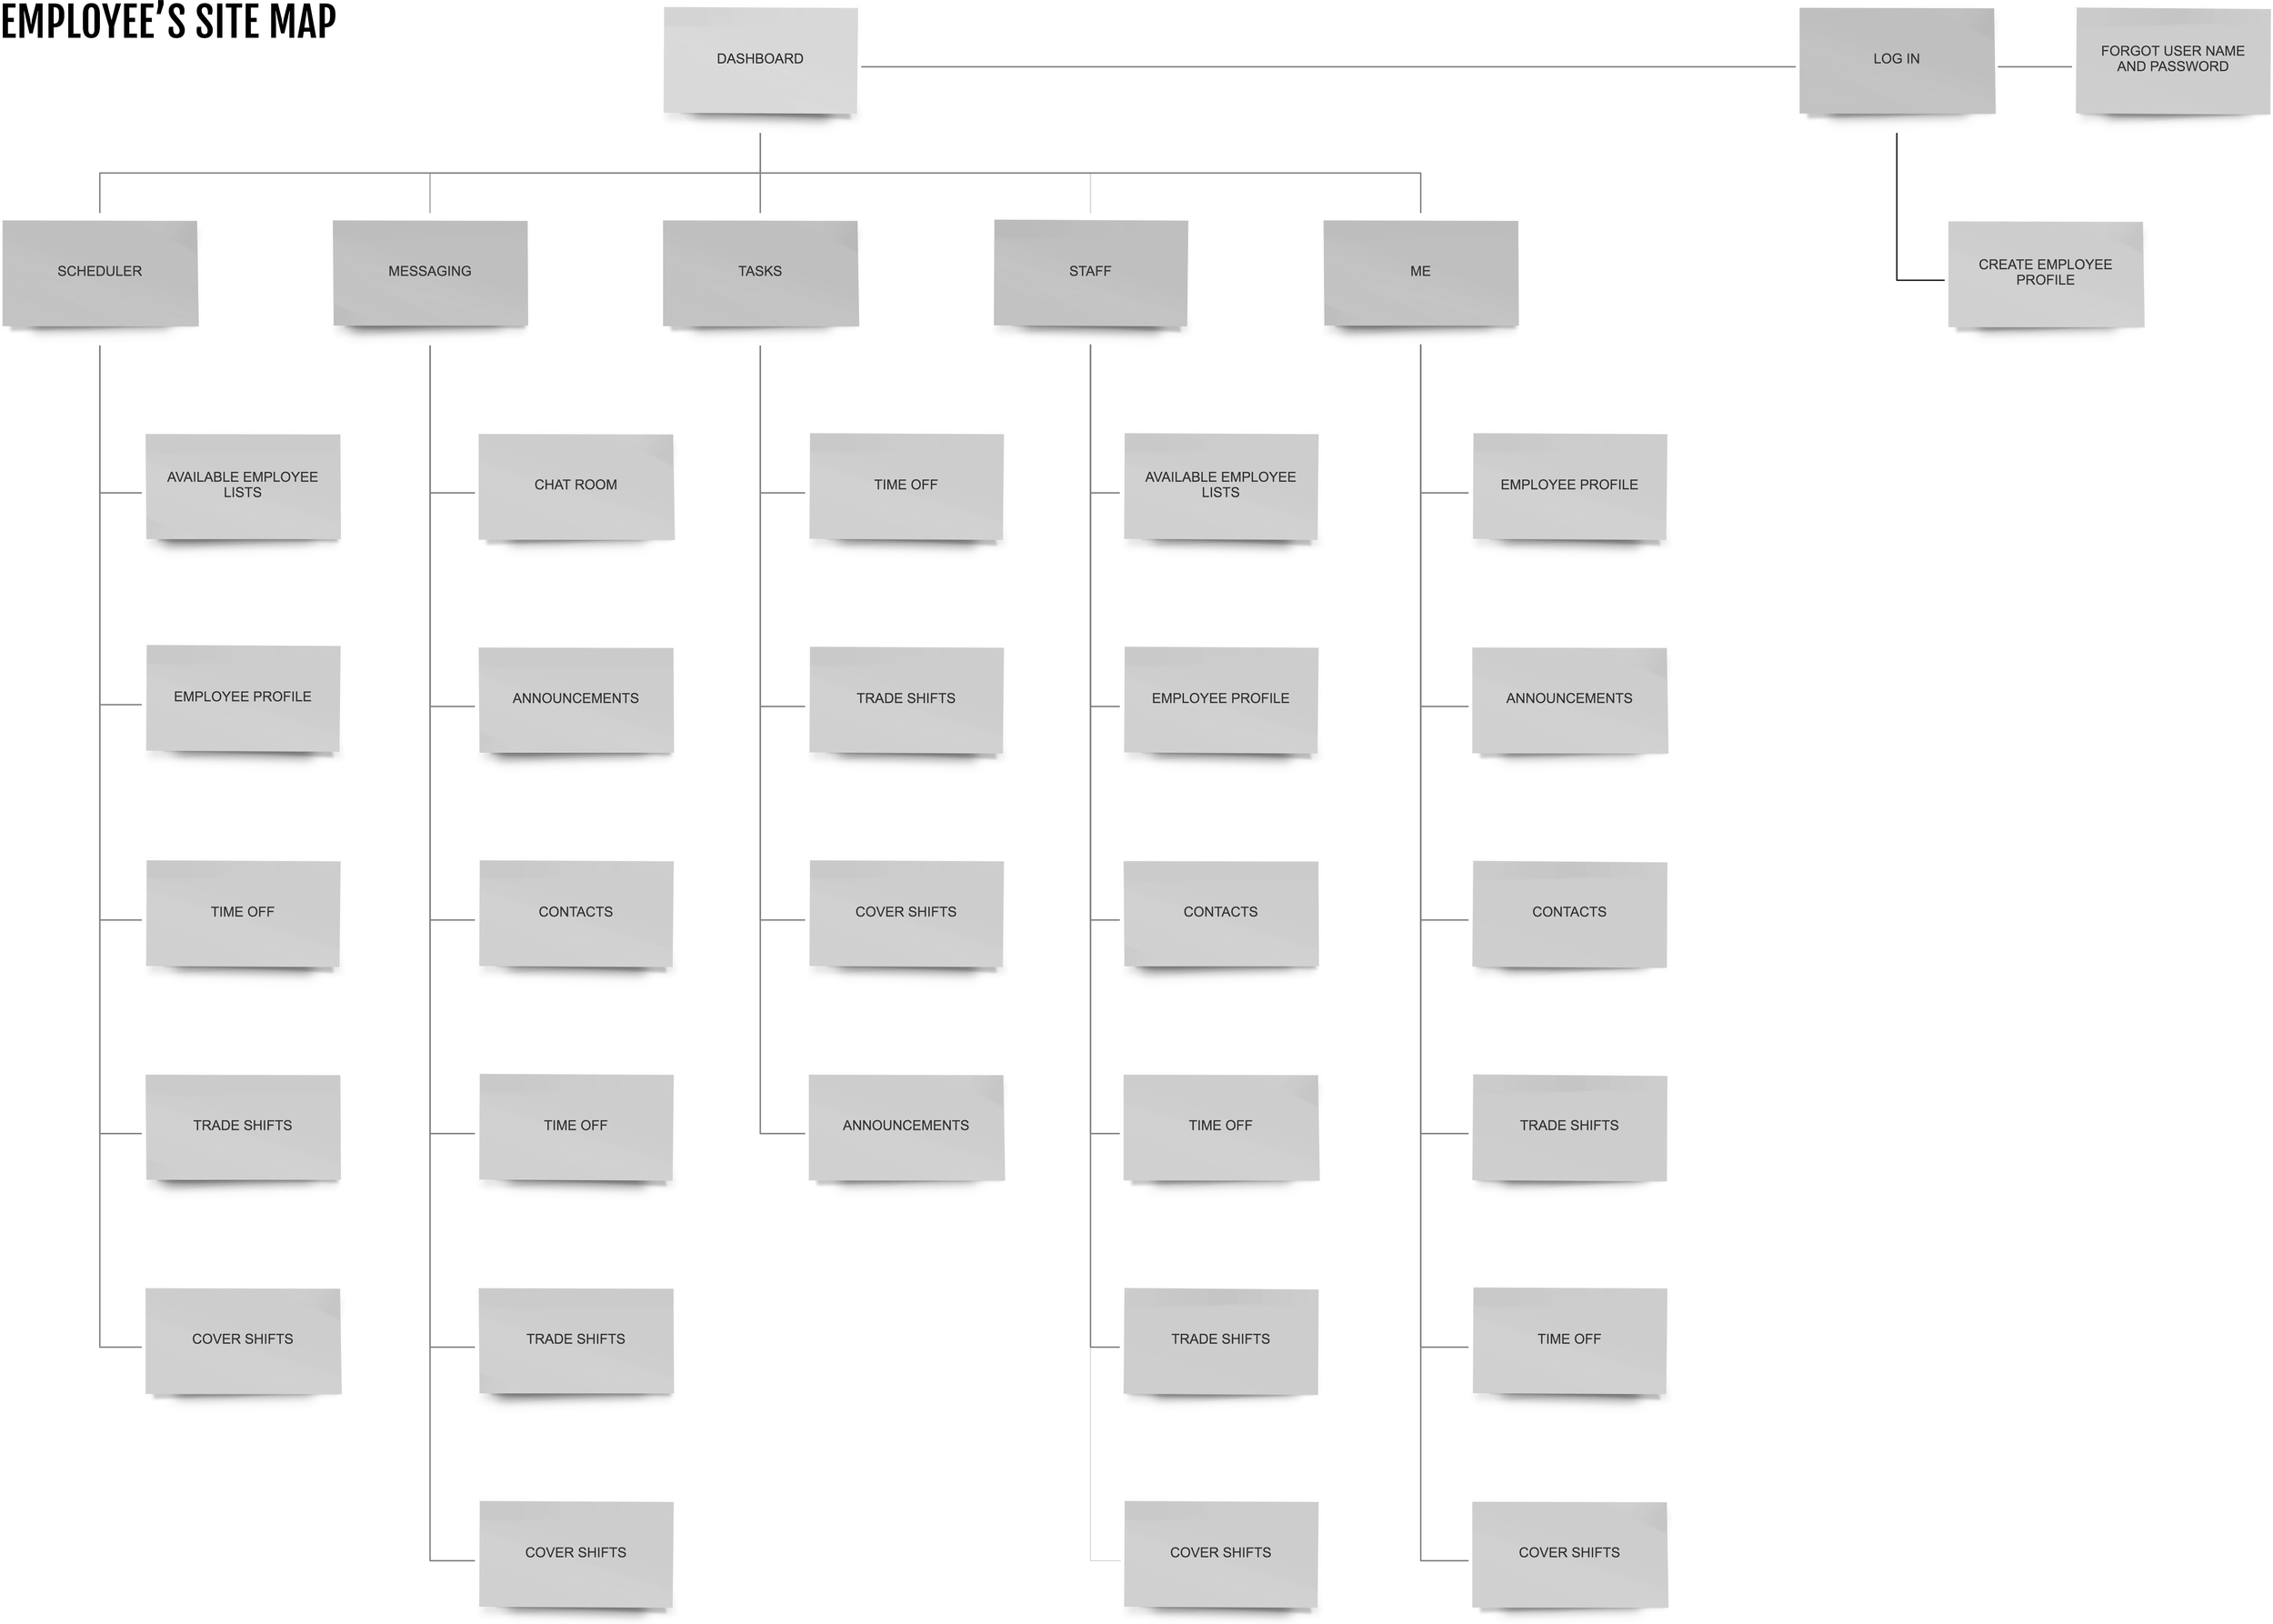 EMPLOYEE-Sitemap---New-frame.png